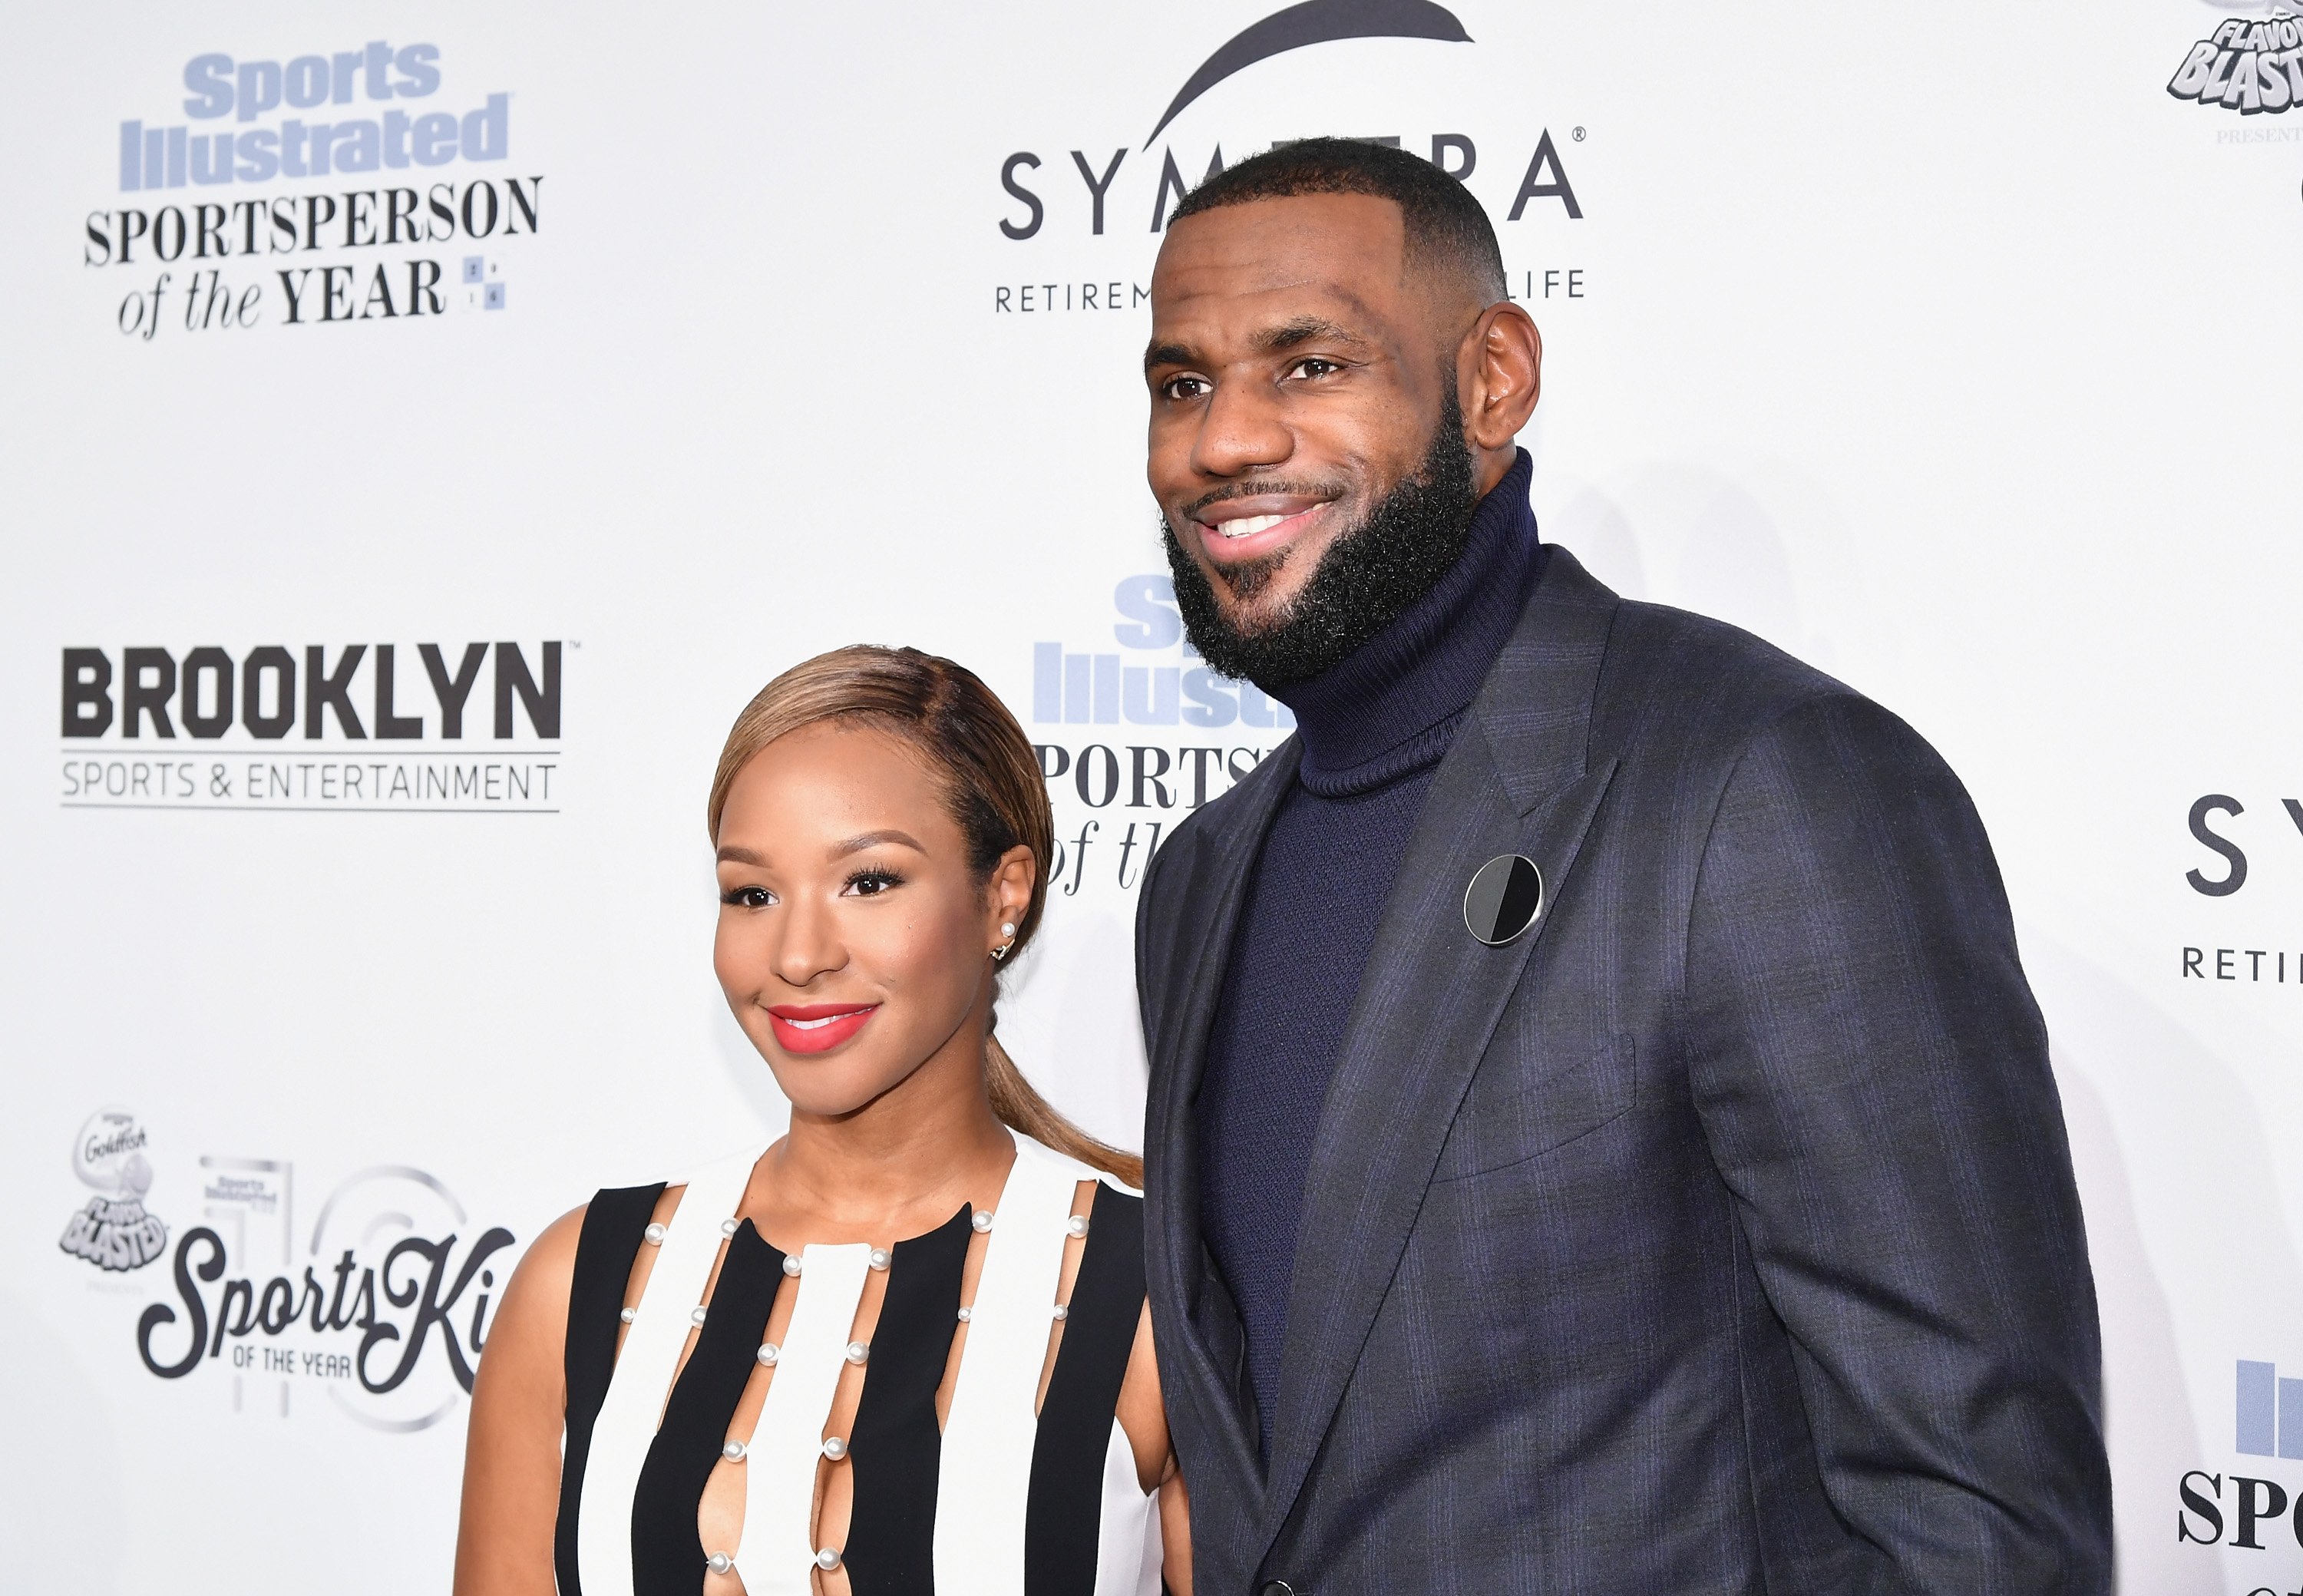 Savannah Brinson and Basketball Player Lebron James at the Sports Illustrated Sportsperson of the Year Ceremony 2016 at Barclays Center of Brooklyn on December 12, 2016 in New York City | Photo: Getty Images